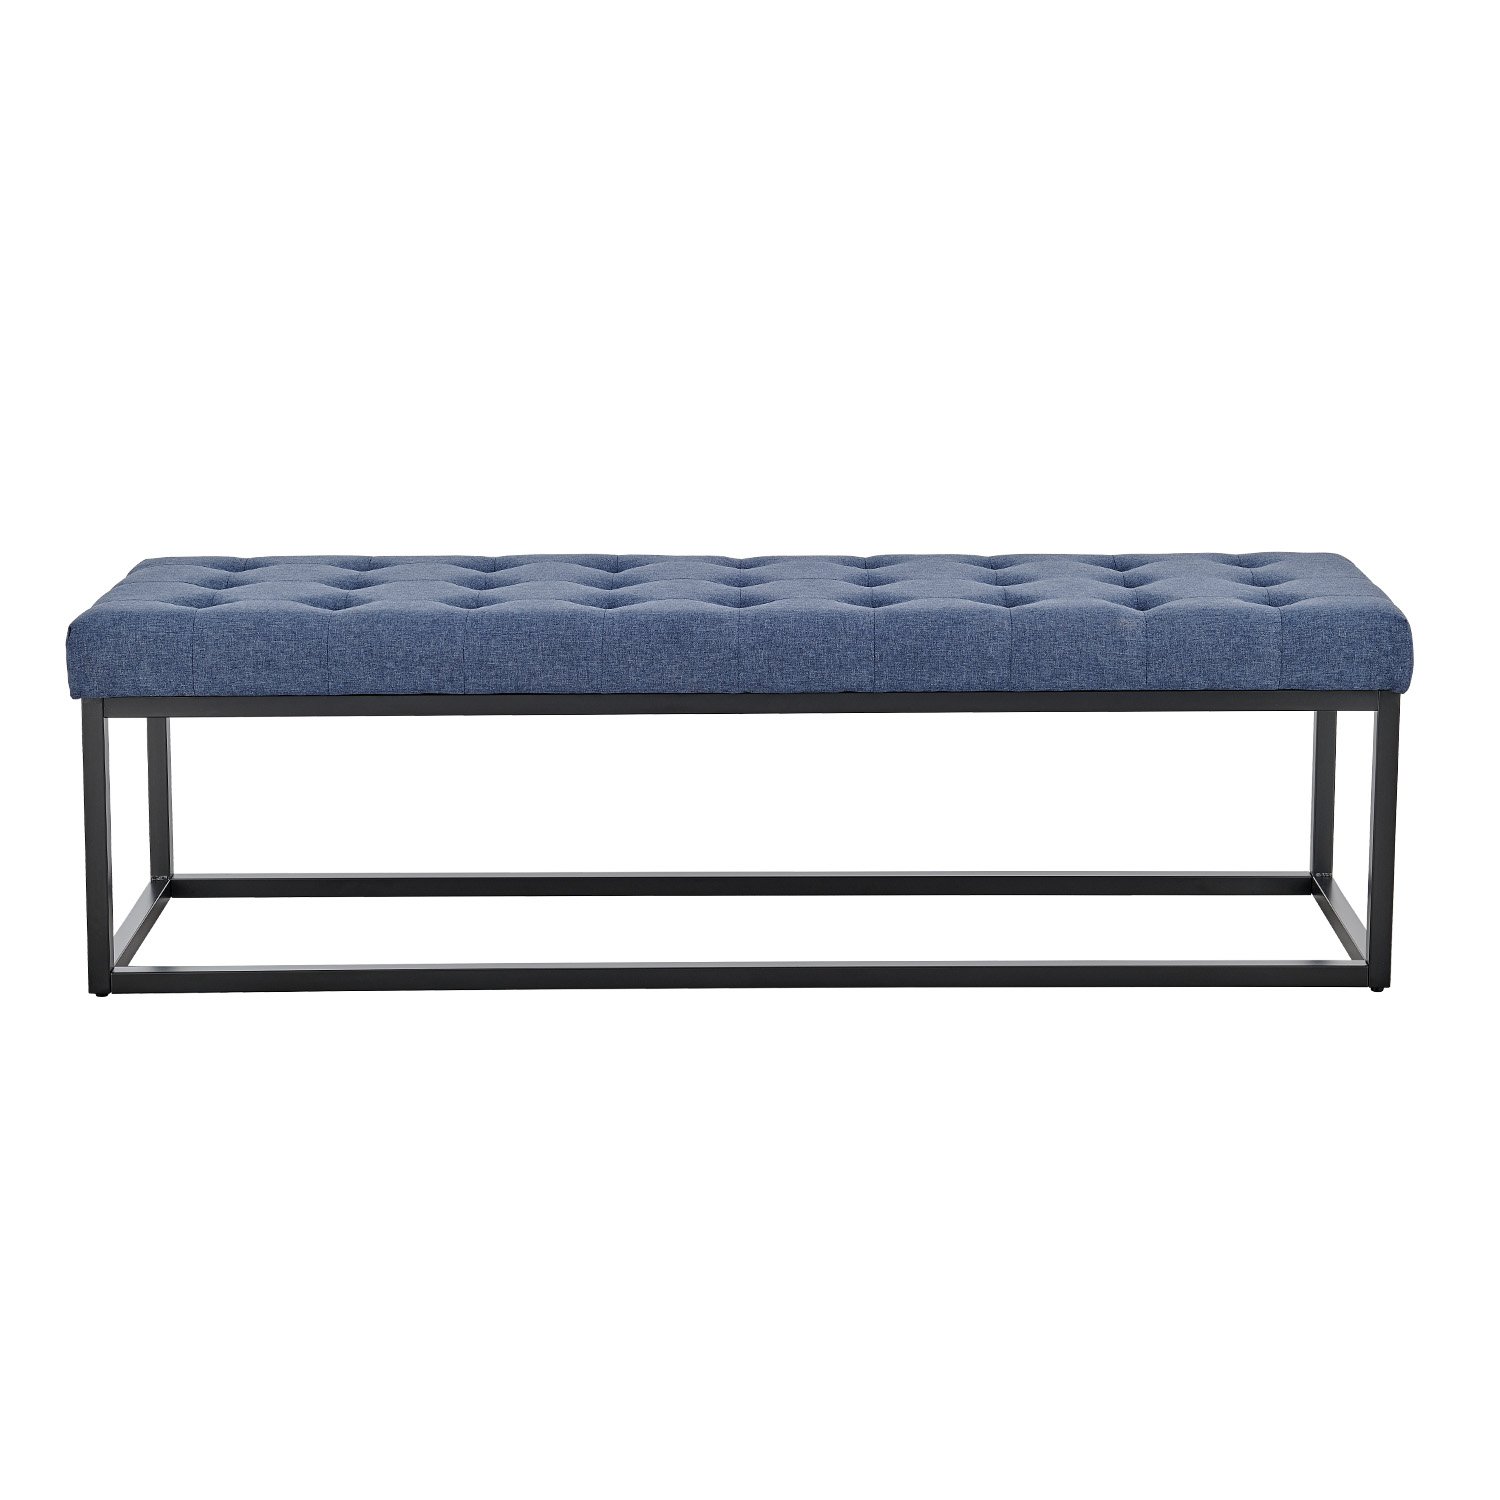 Cameron Button-Tufted Upholstered Bench with Metal Legs - Blue 2